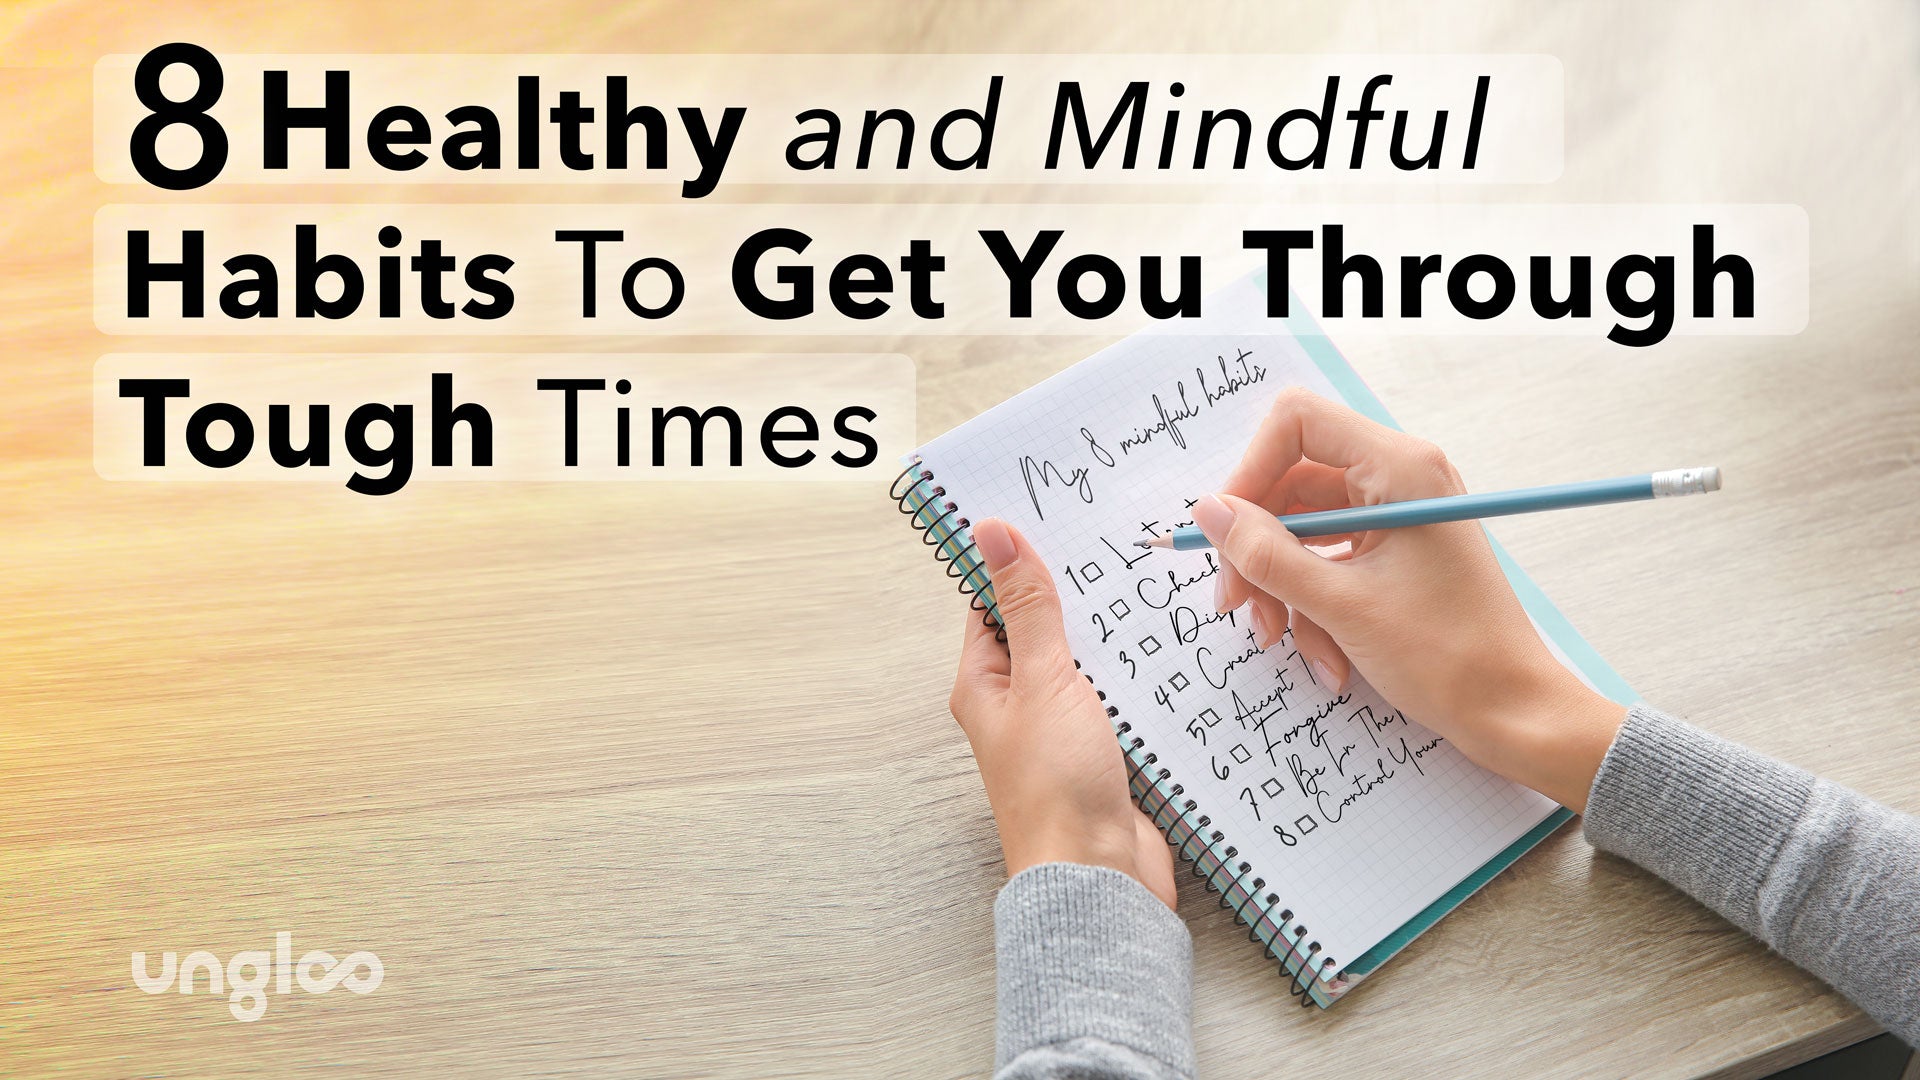 Eight Healthy (and Mindful) Habits To Get You Through Tough Times